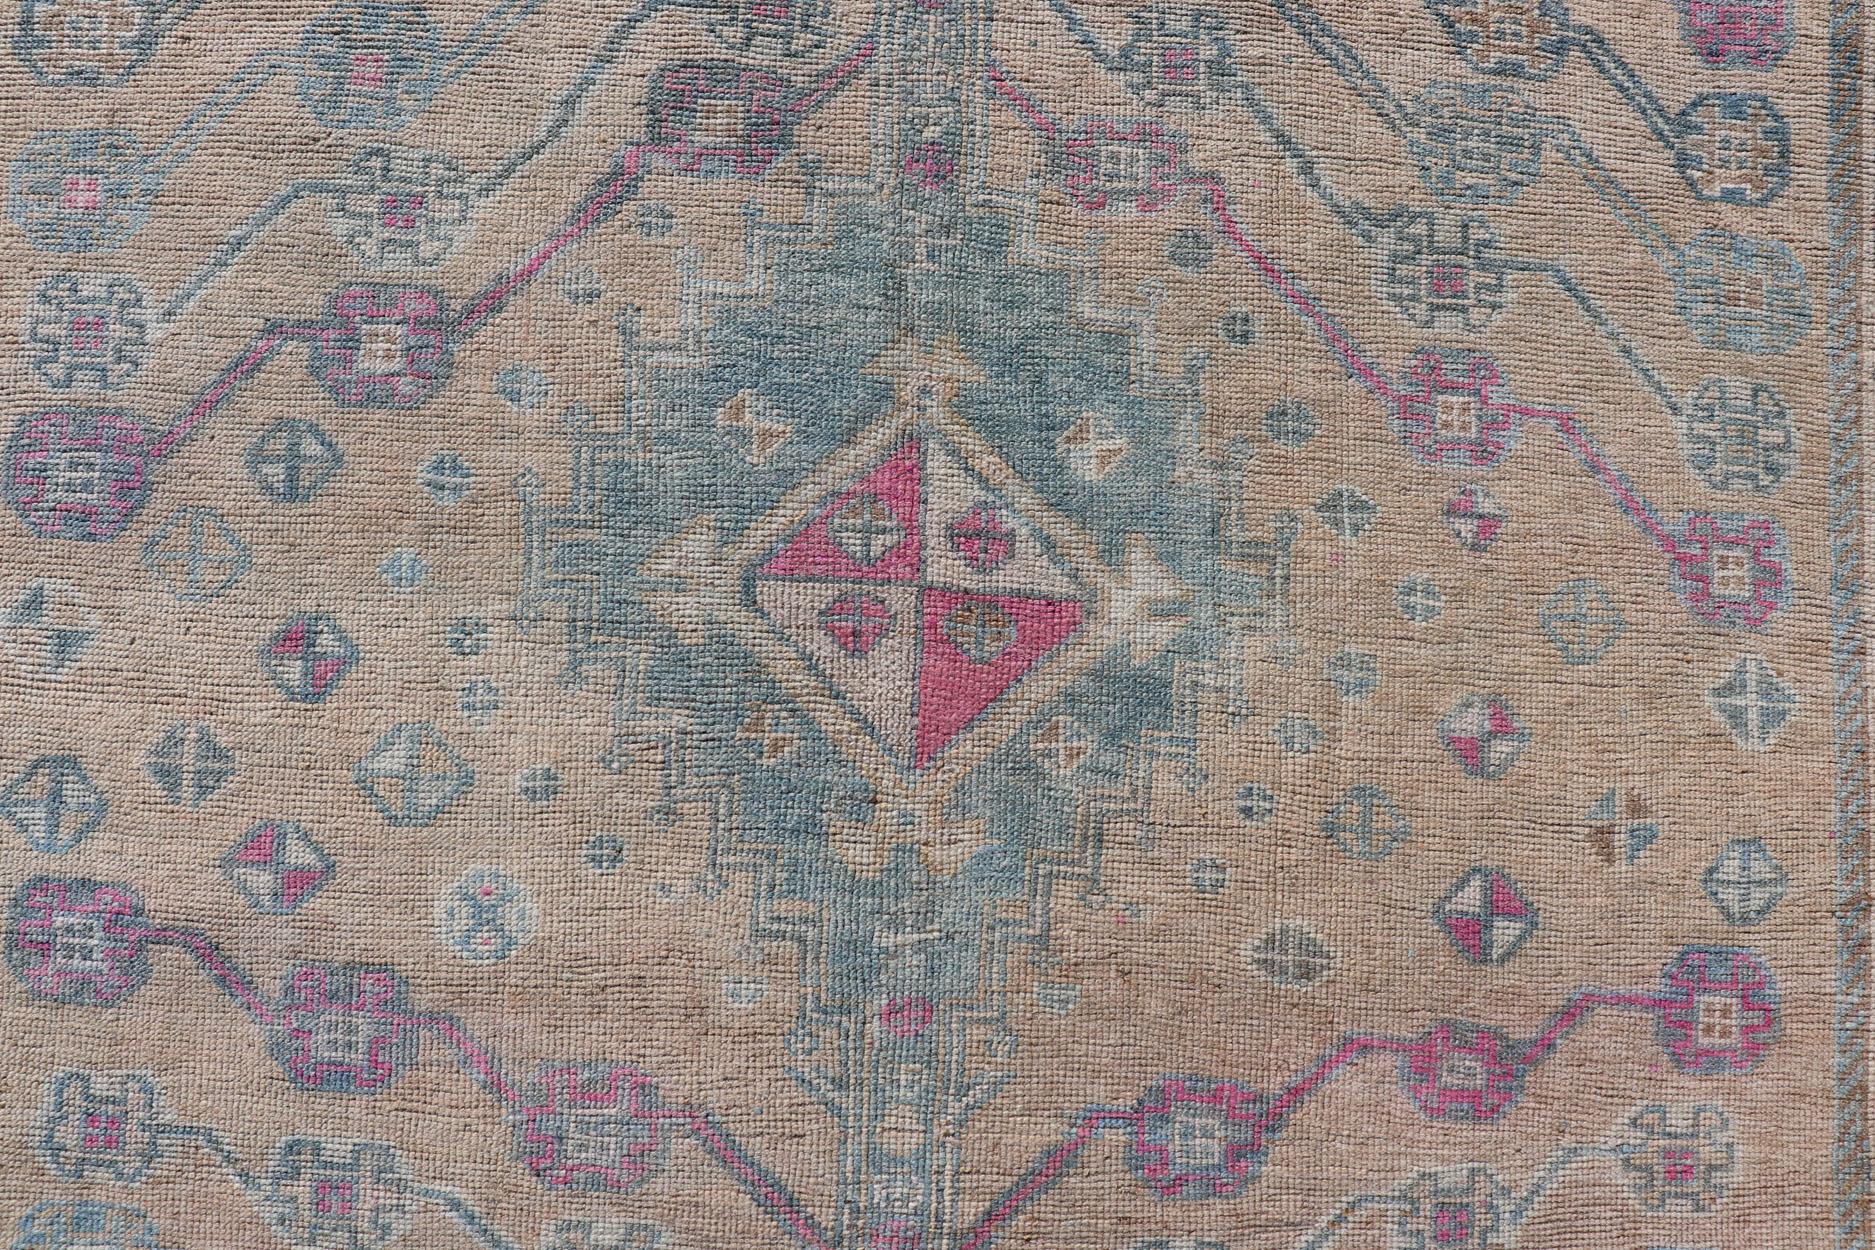 Measures: 4'10 x 7'4 
Vintage Persian Shiraz with Tribal Design in Soft Yellow, Pink, and Blue Gray. Keivan Woven Arts / rug EMB-9668-13562, country of origin / type: Persian / Tribal, circa mid-20th century. 

This vintage Persian rug features a